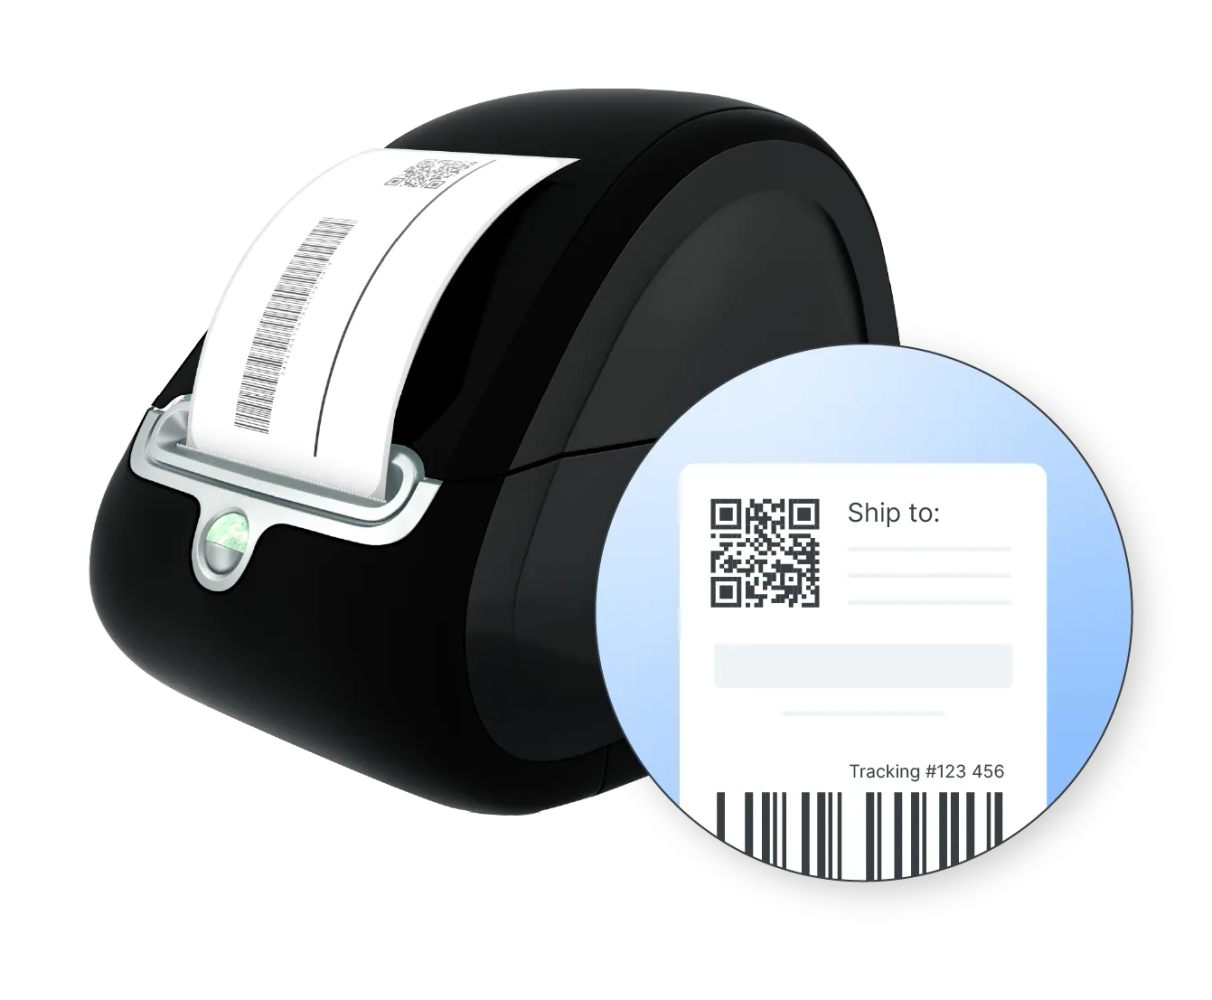 Shipping label printer with printed label and label inset